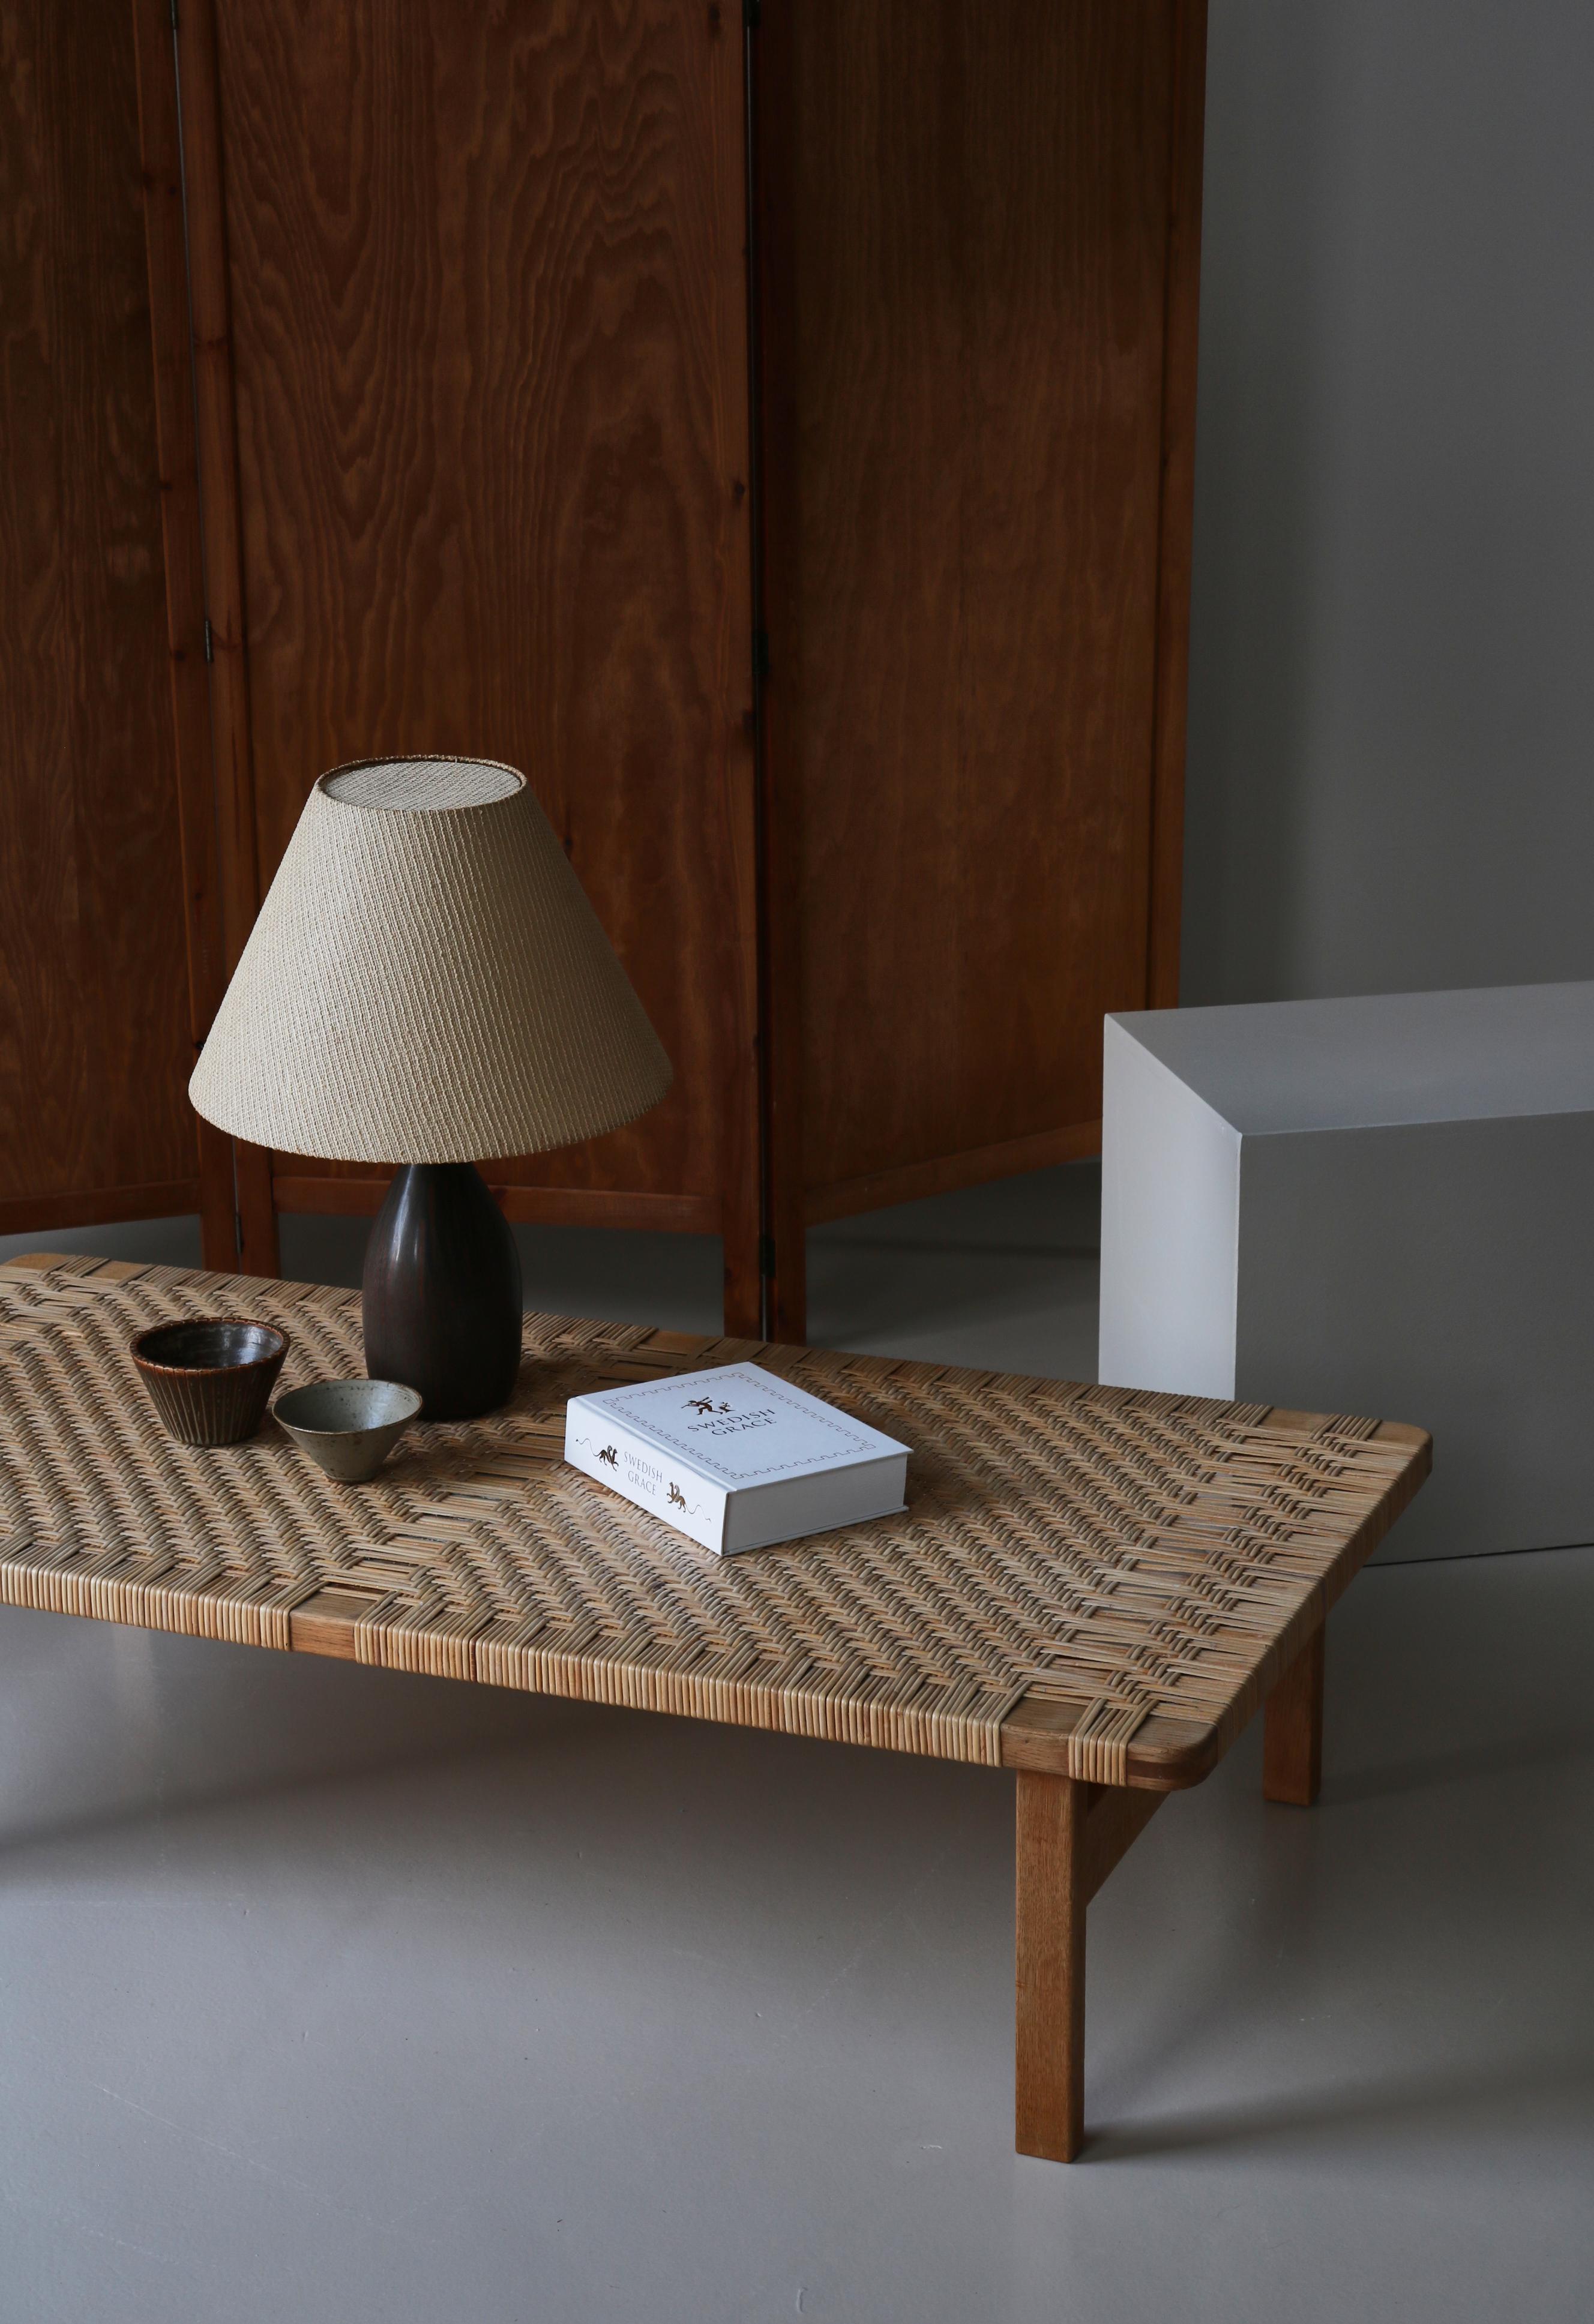 Borge Mogensen Large Side Table or Bench in Oak and Rattan Cane, 1960s, Denmark For Sale 10